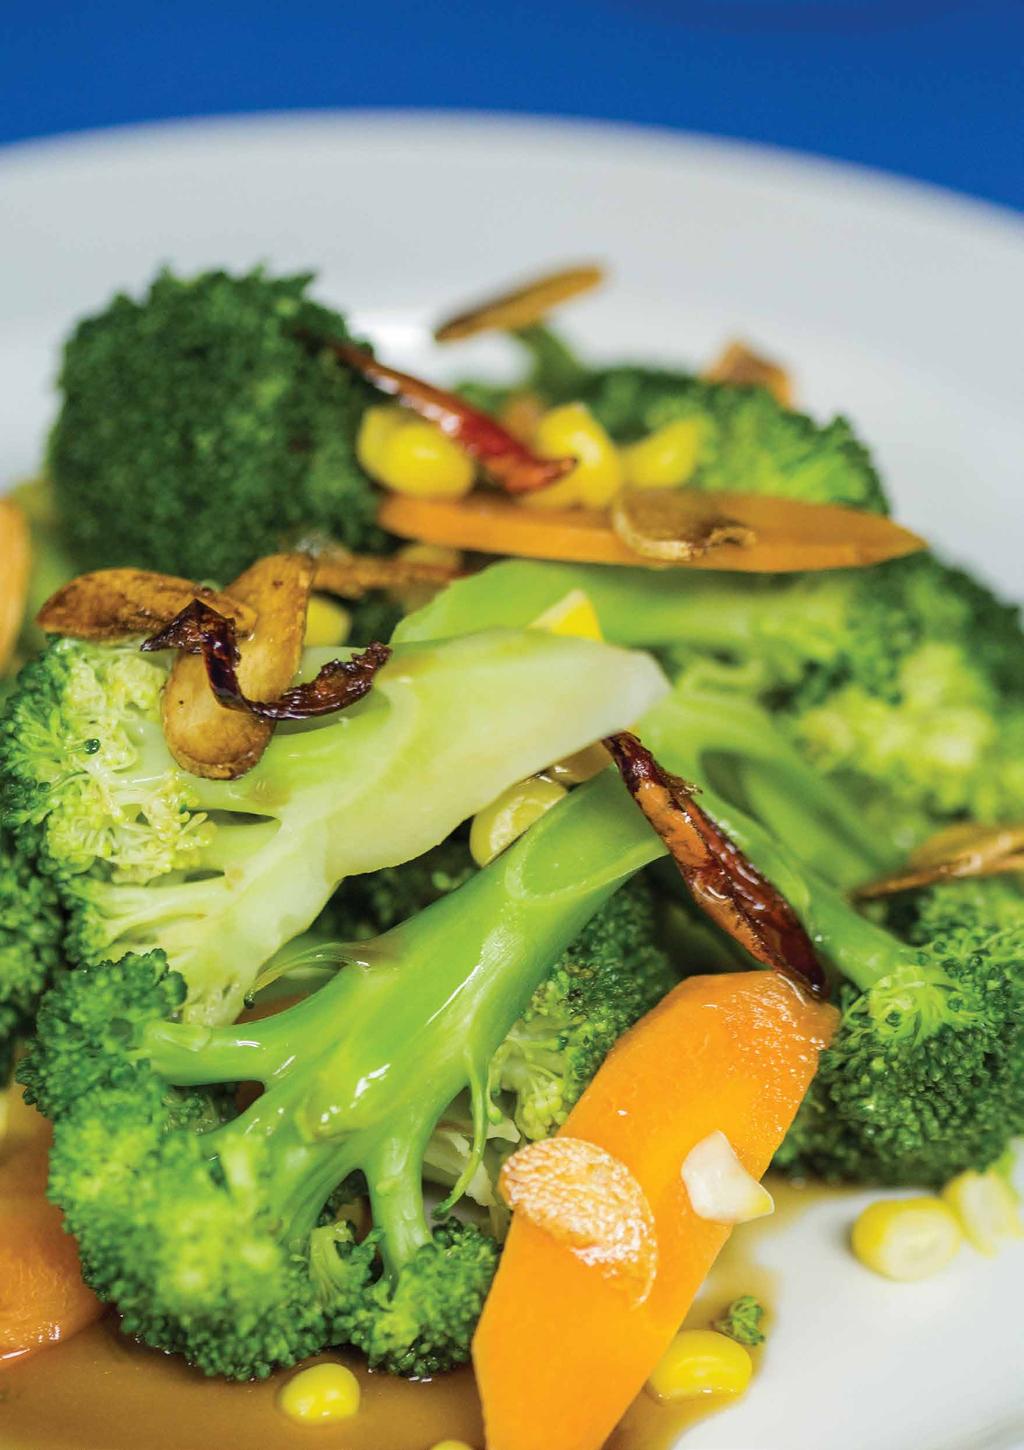 Energy (kcal) 111 Total Fat (g) 8 Sat Fat (g) 1 Carbohydrate (g) 4 Protein (g) 4 Dietary fibre (g) 5 Sodium (mg) 466 Calcium (mg) 37 Folate (µg) 33 Iron (mg) 1 Steamed Broccoli with Garlic and Chilli